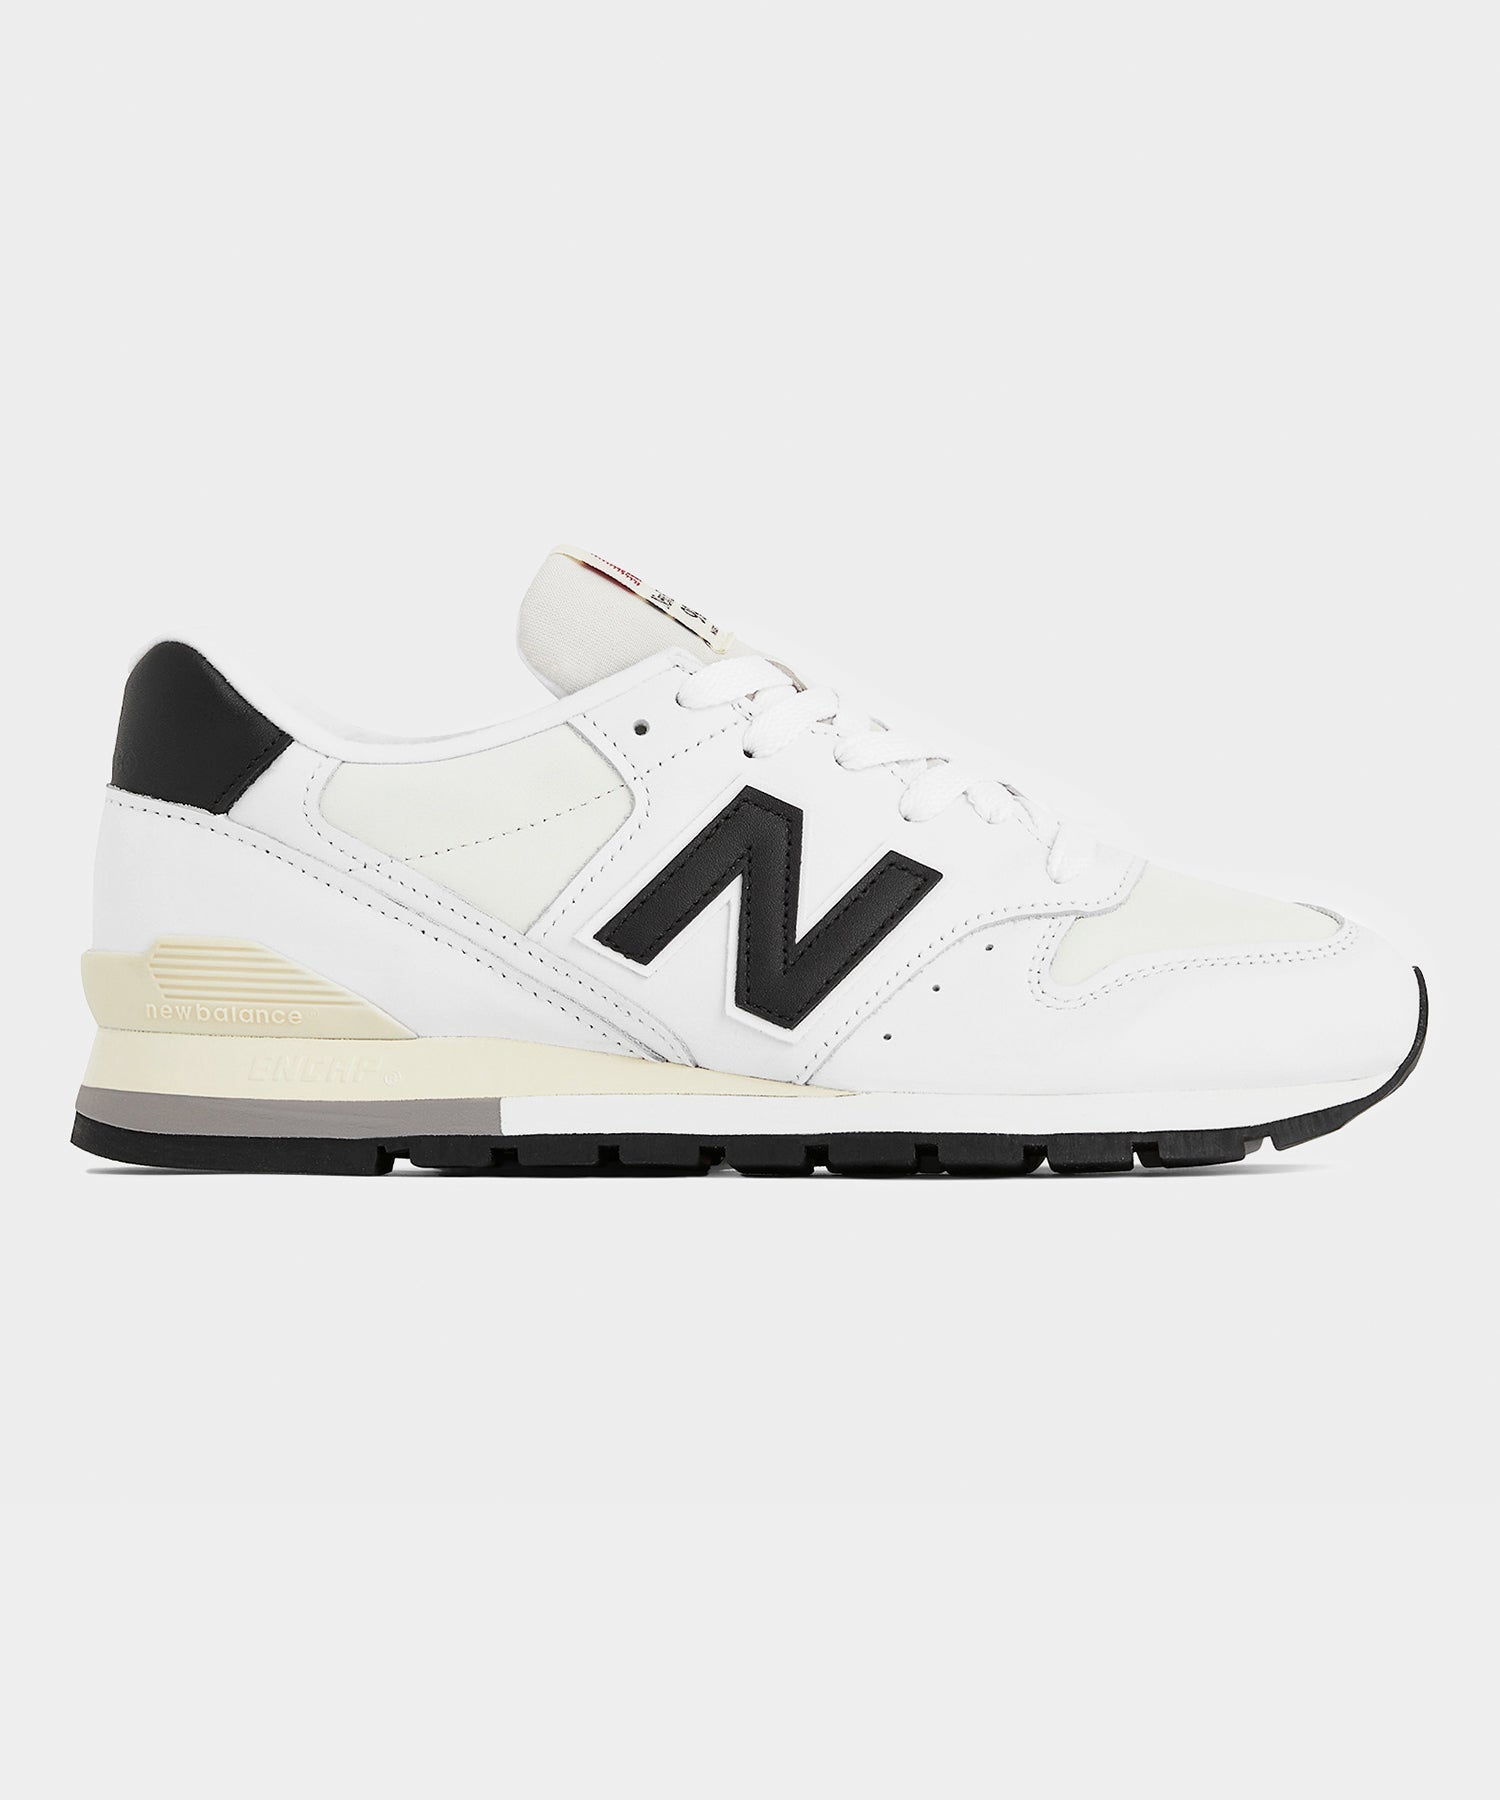 New Balance Made in USA 996 in White / Black